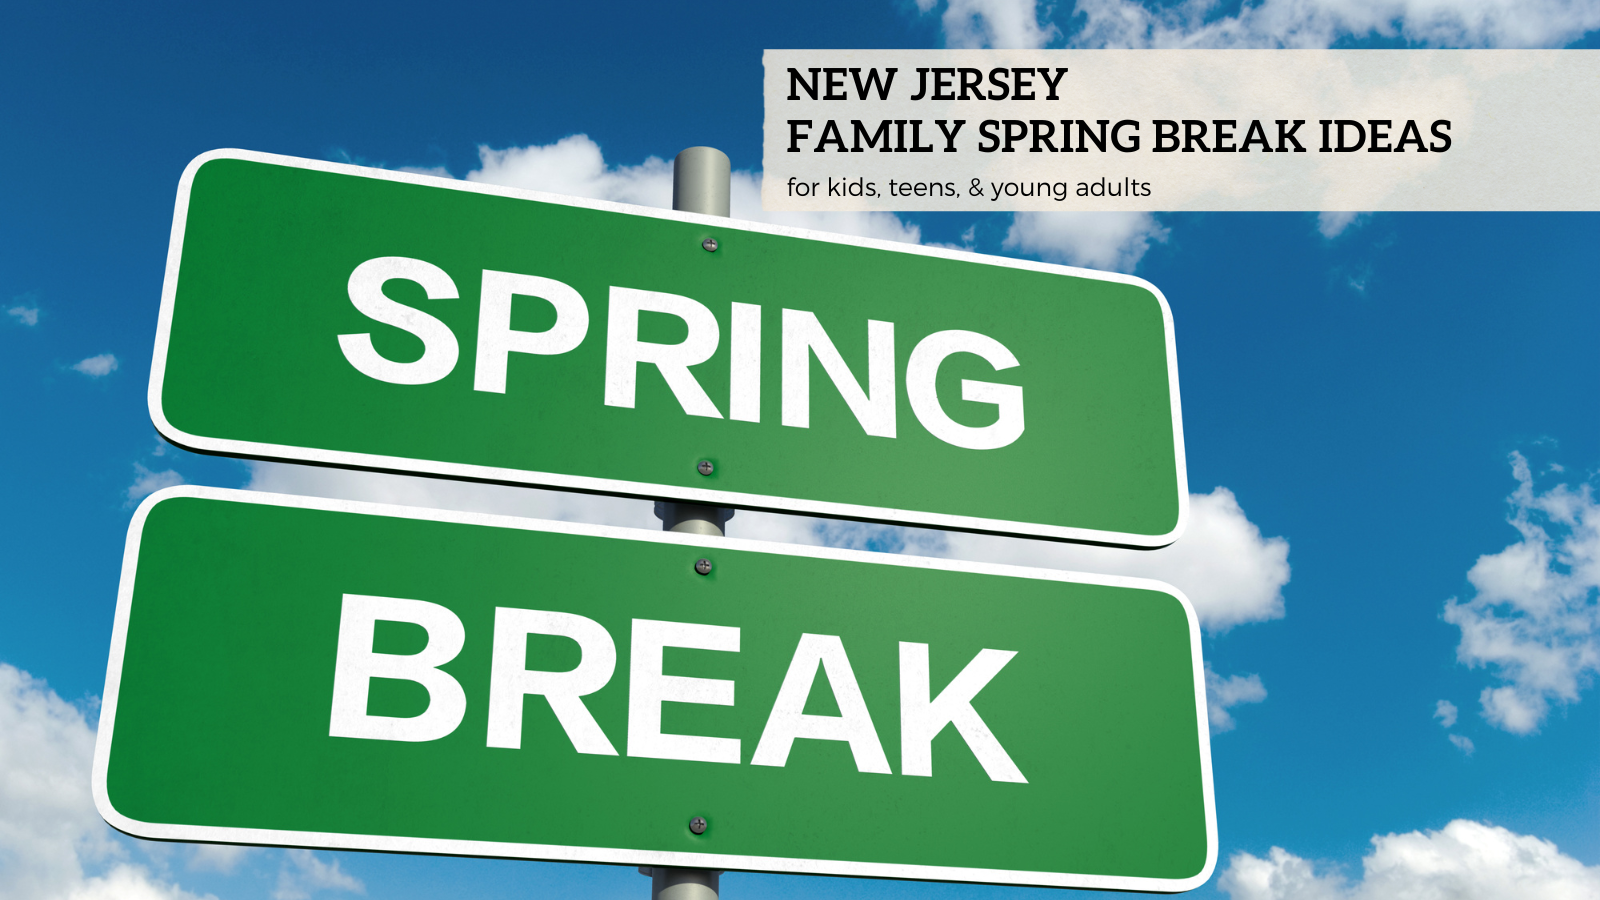 New Jersey Family Spring Break Ideas image with road signs that say spring break